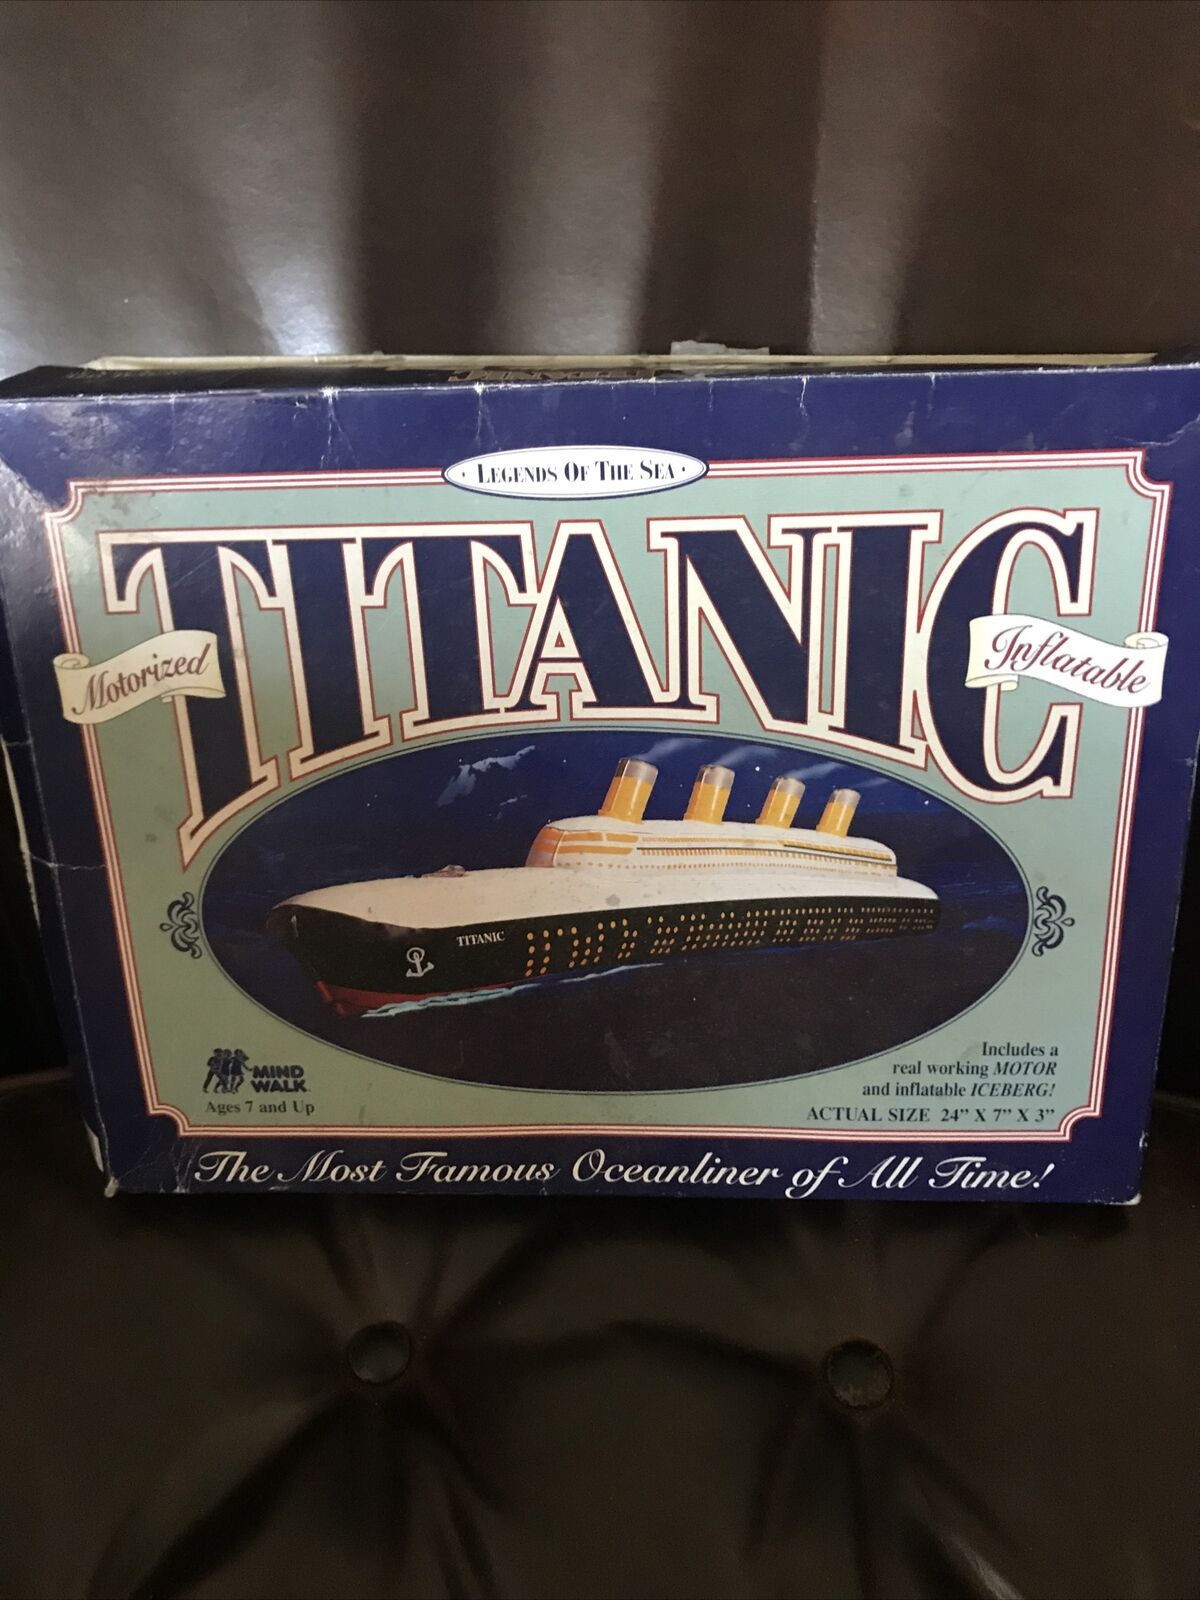 PRE-OWNED 1997 LEGENDS OF THE SEA INFLATABLE RMS  TITANIC W/ICEBERG - NO MOTOR